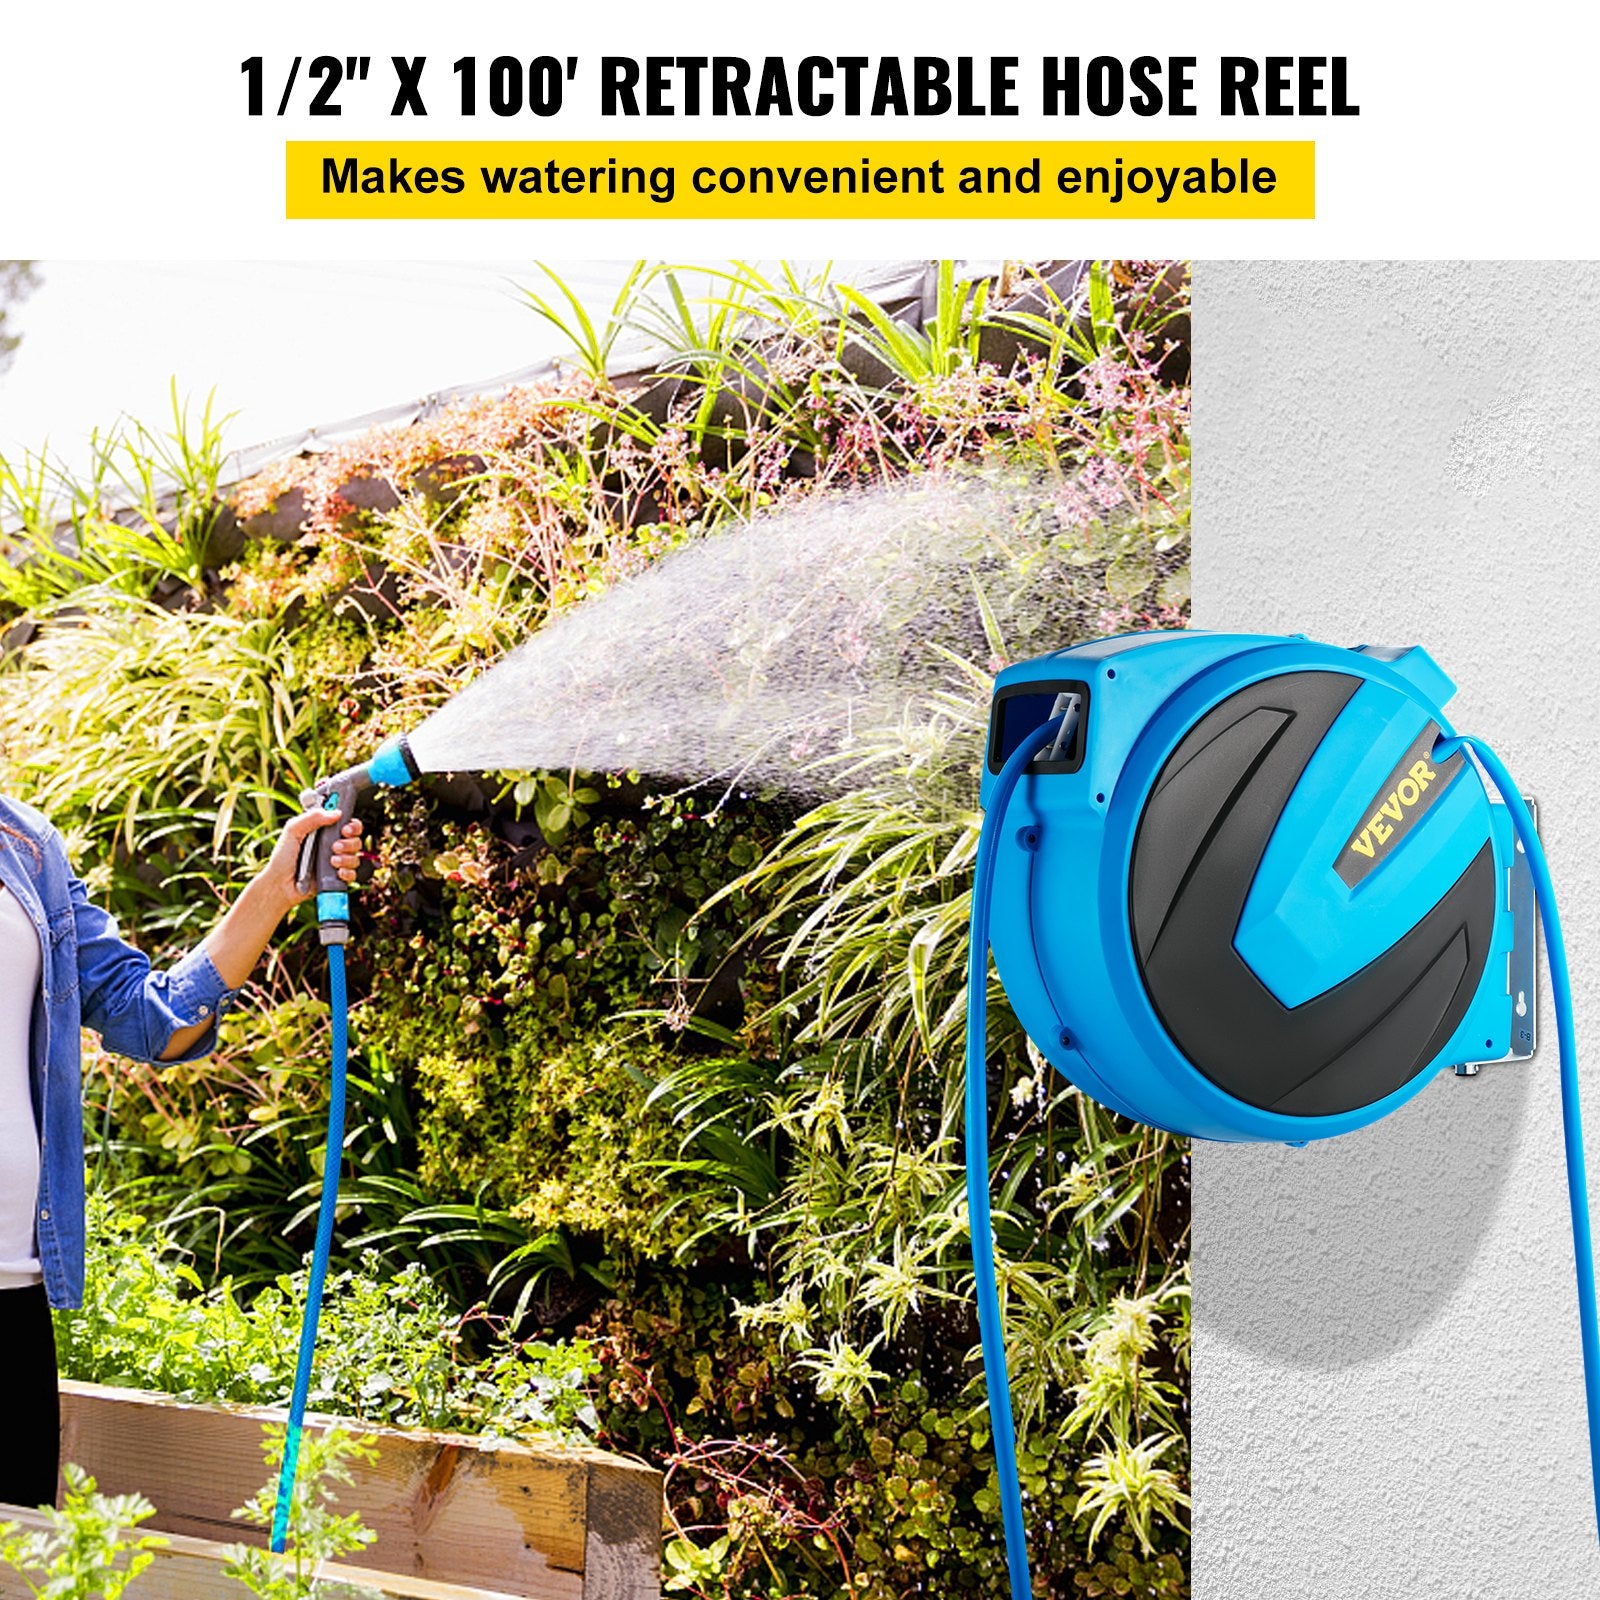 VEVOR Retractable Hose Reel - 1/2 Inch x 100 ft Automatic Rewind Water Hose with Any Length Lock